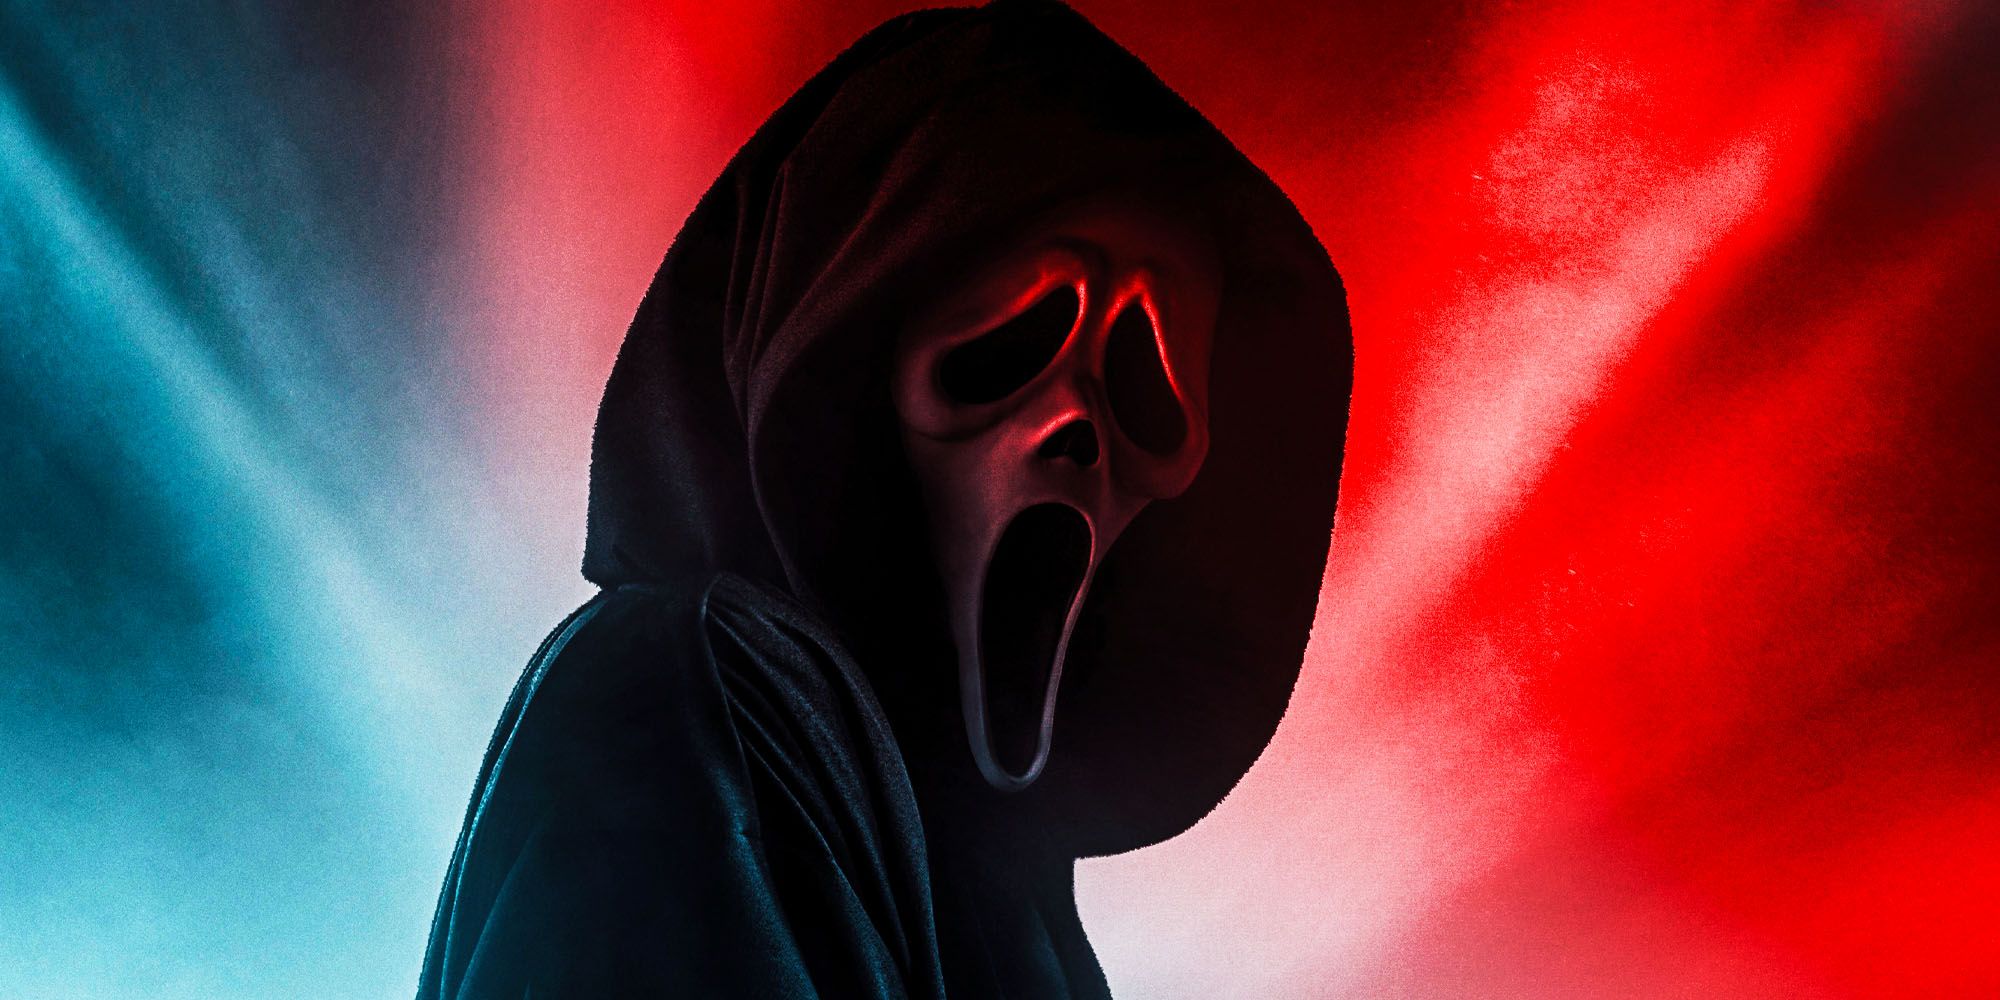 Blue and red image of Scream's Ghostface